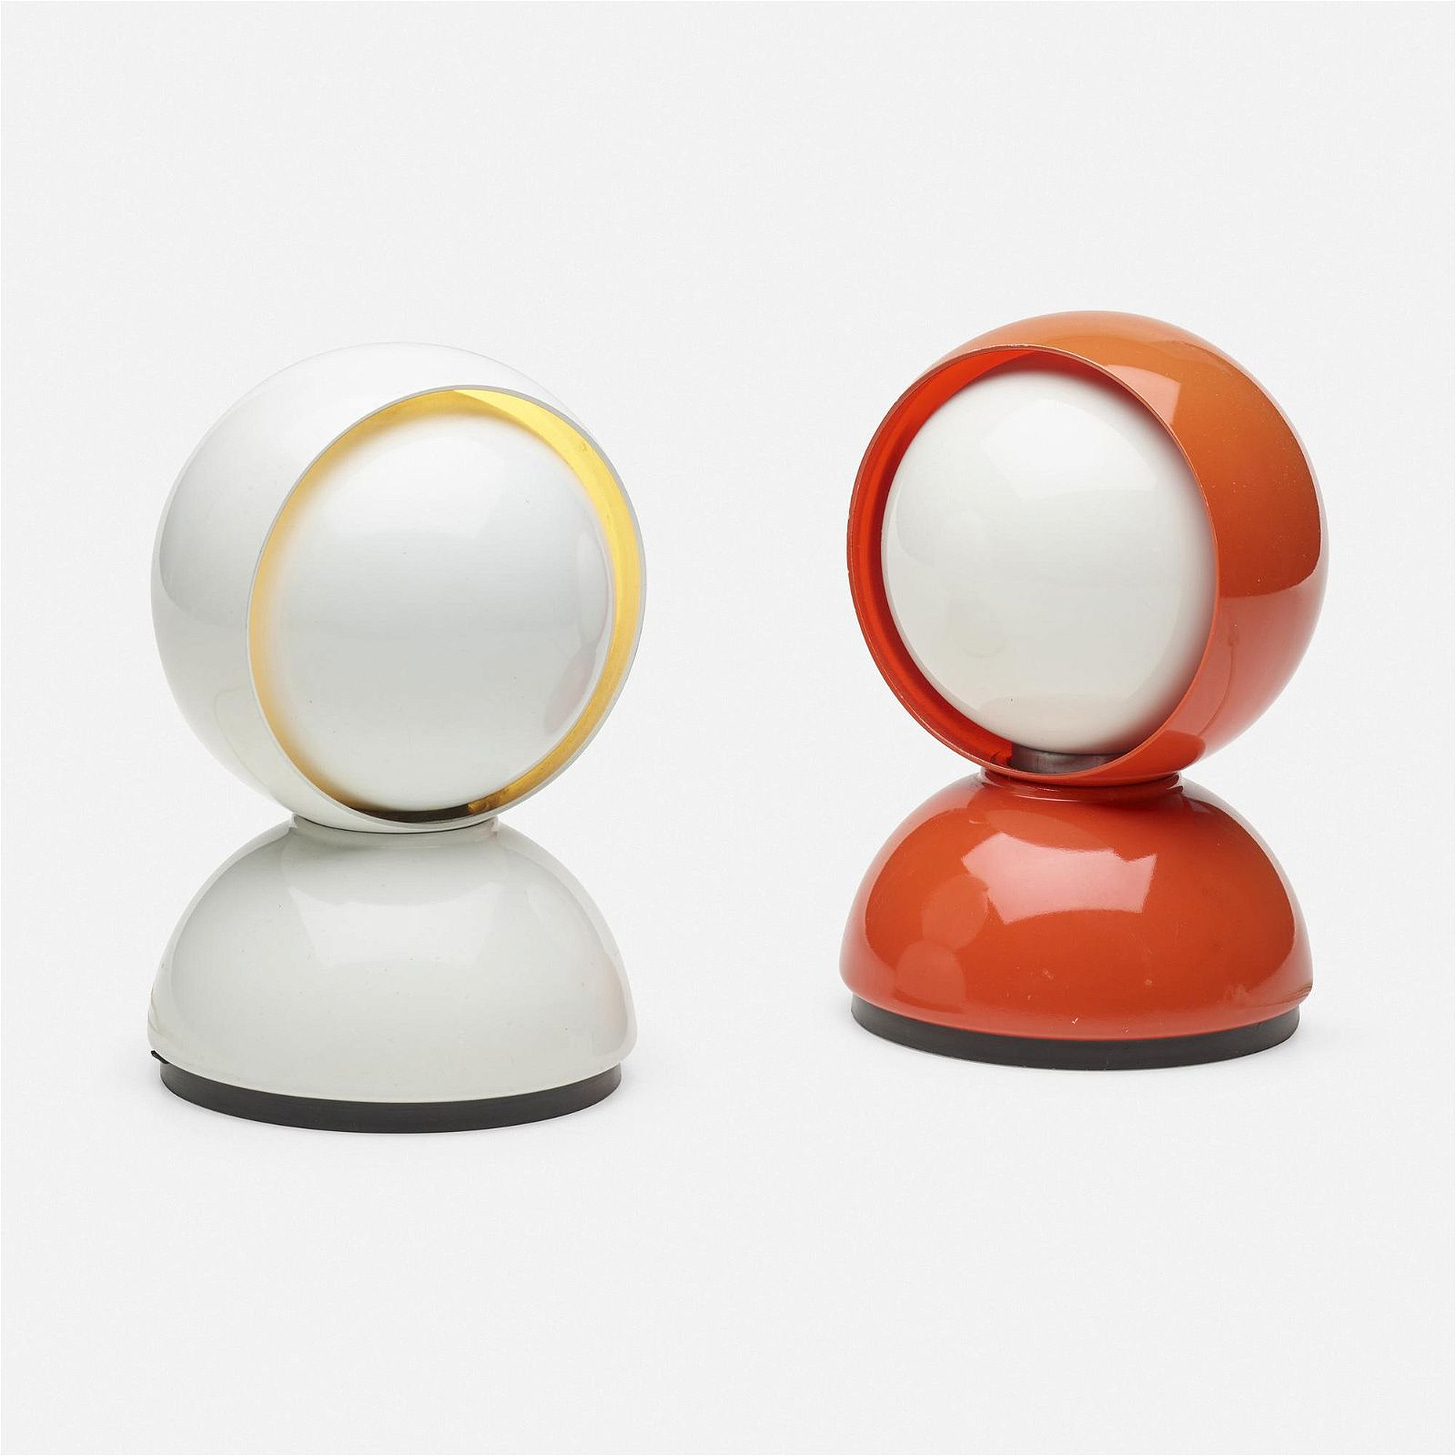 Vico Magistretti, Eclisse table lamps, pair - 2